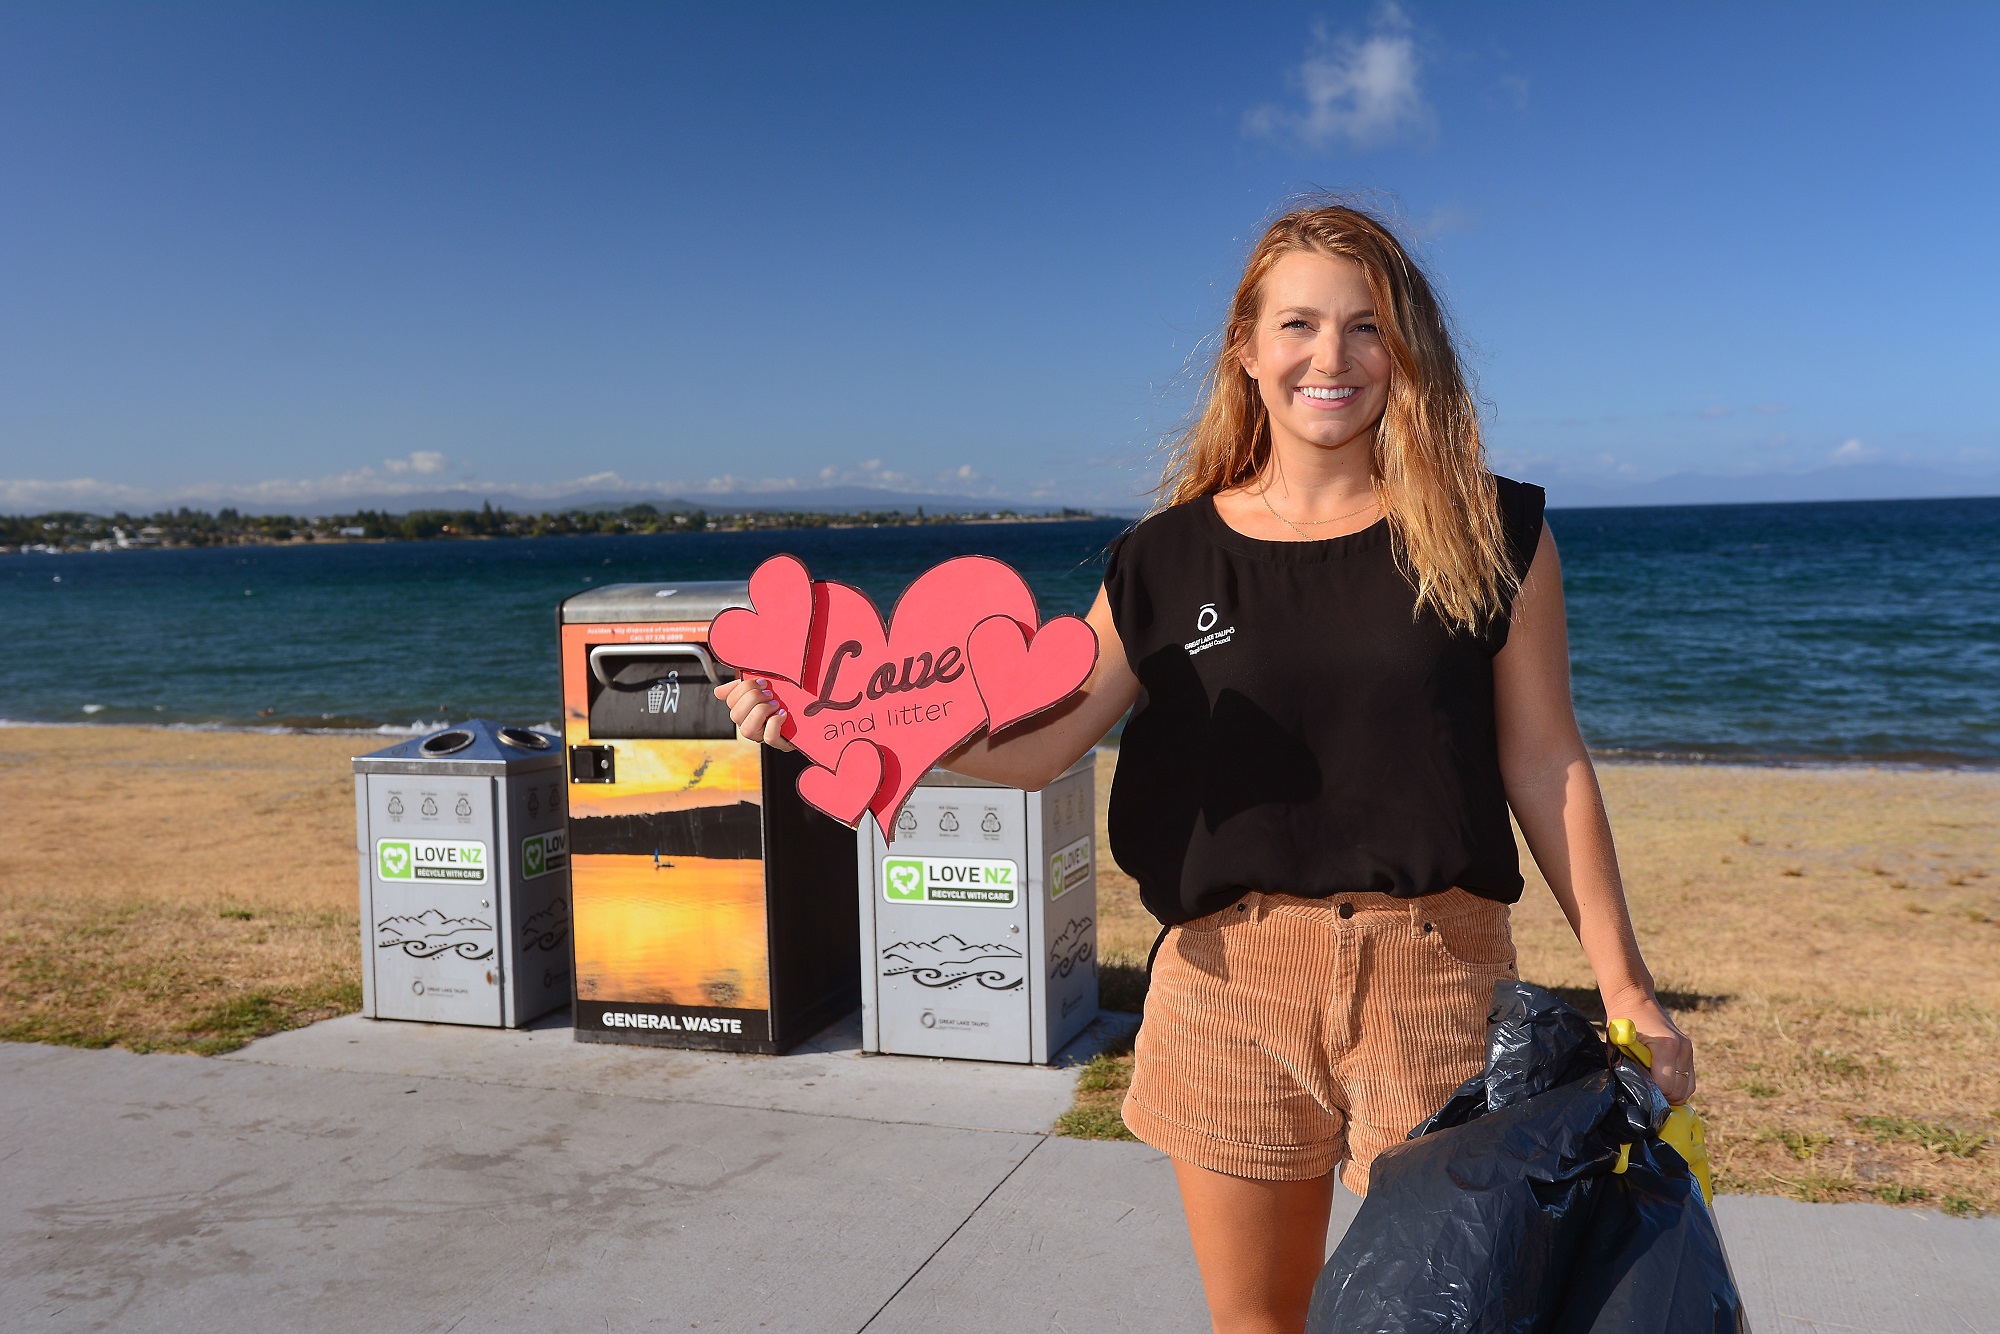 Taupō District Council environmental ranger Shannon Hanson is organising lakefront clean-up event Looking for Love & Litter on Sunday 20 February.  